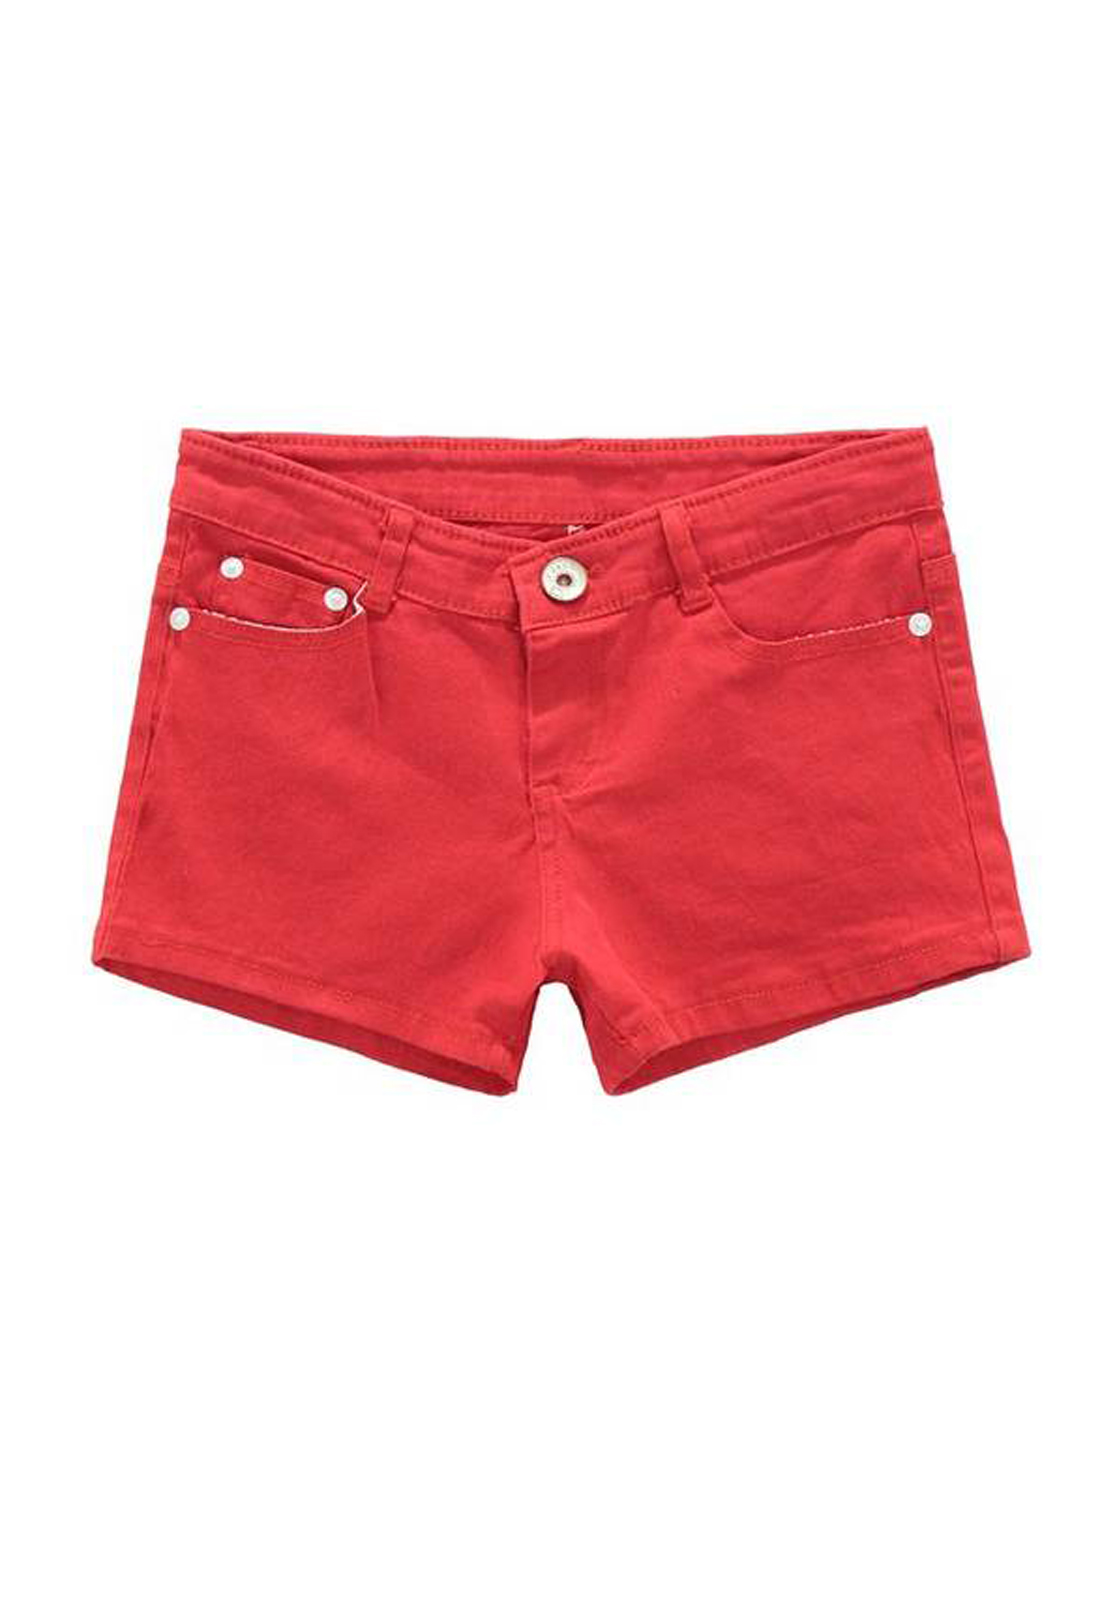 Casual-Candy-Color-Hot-Shorts-Pants-70149